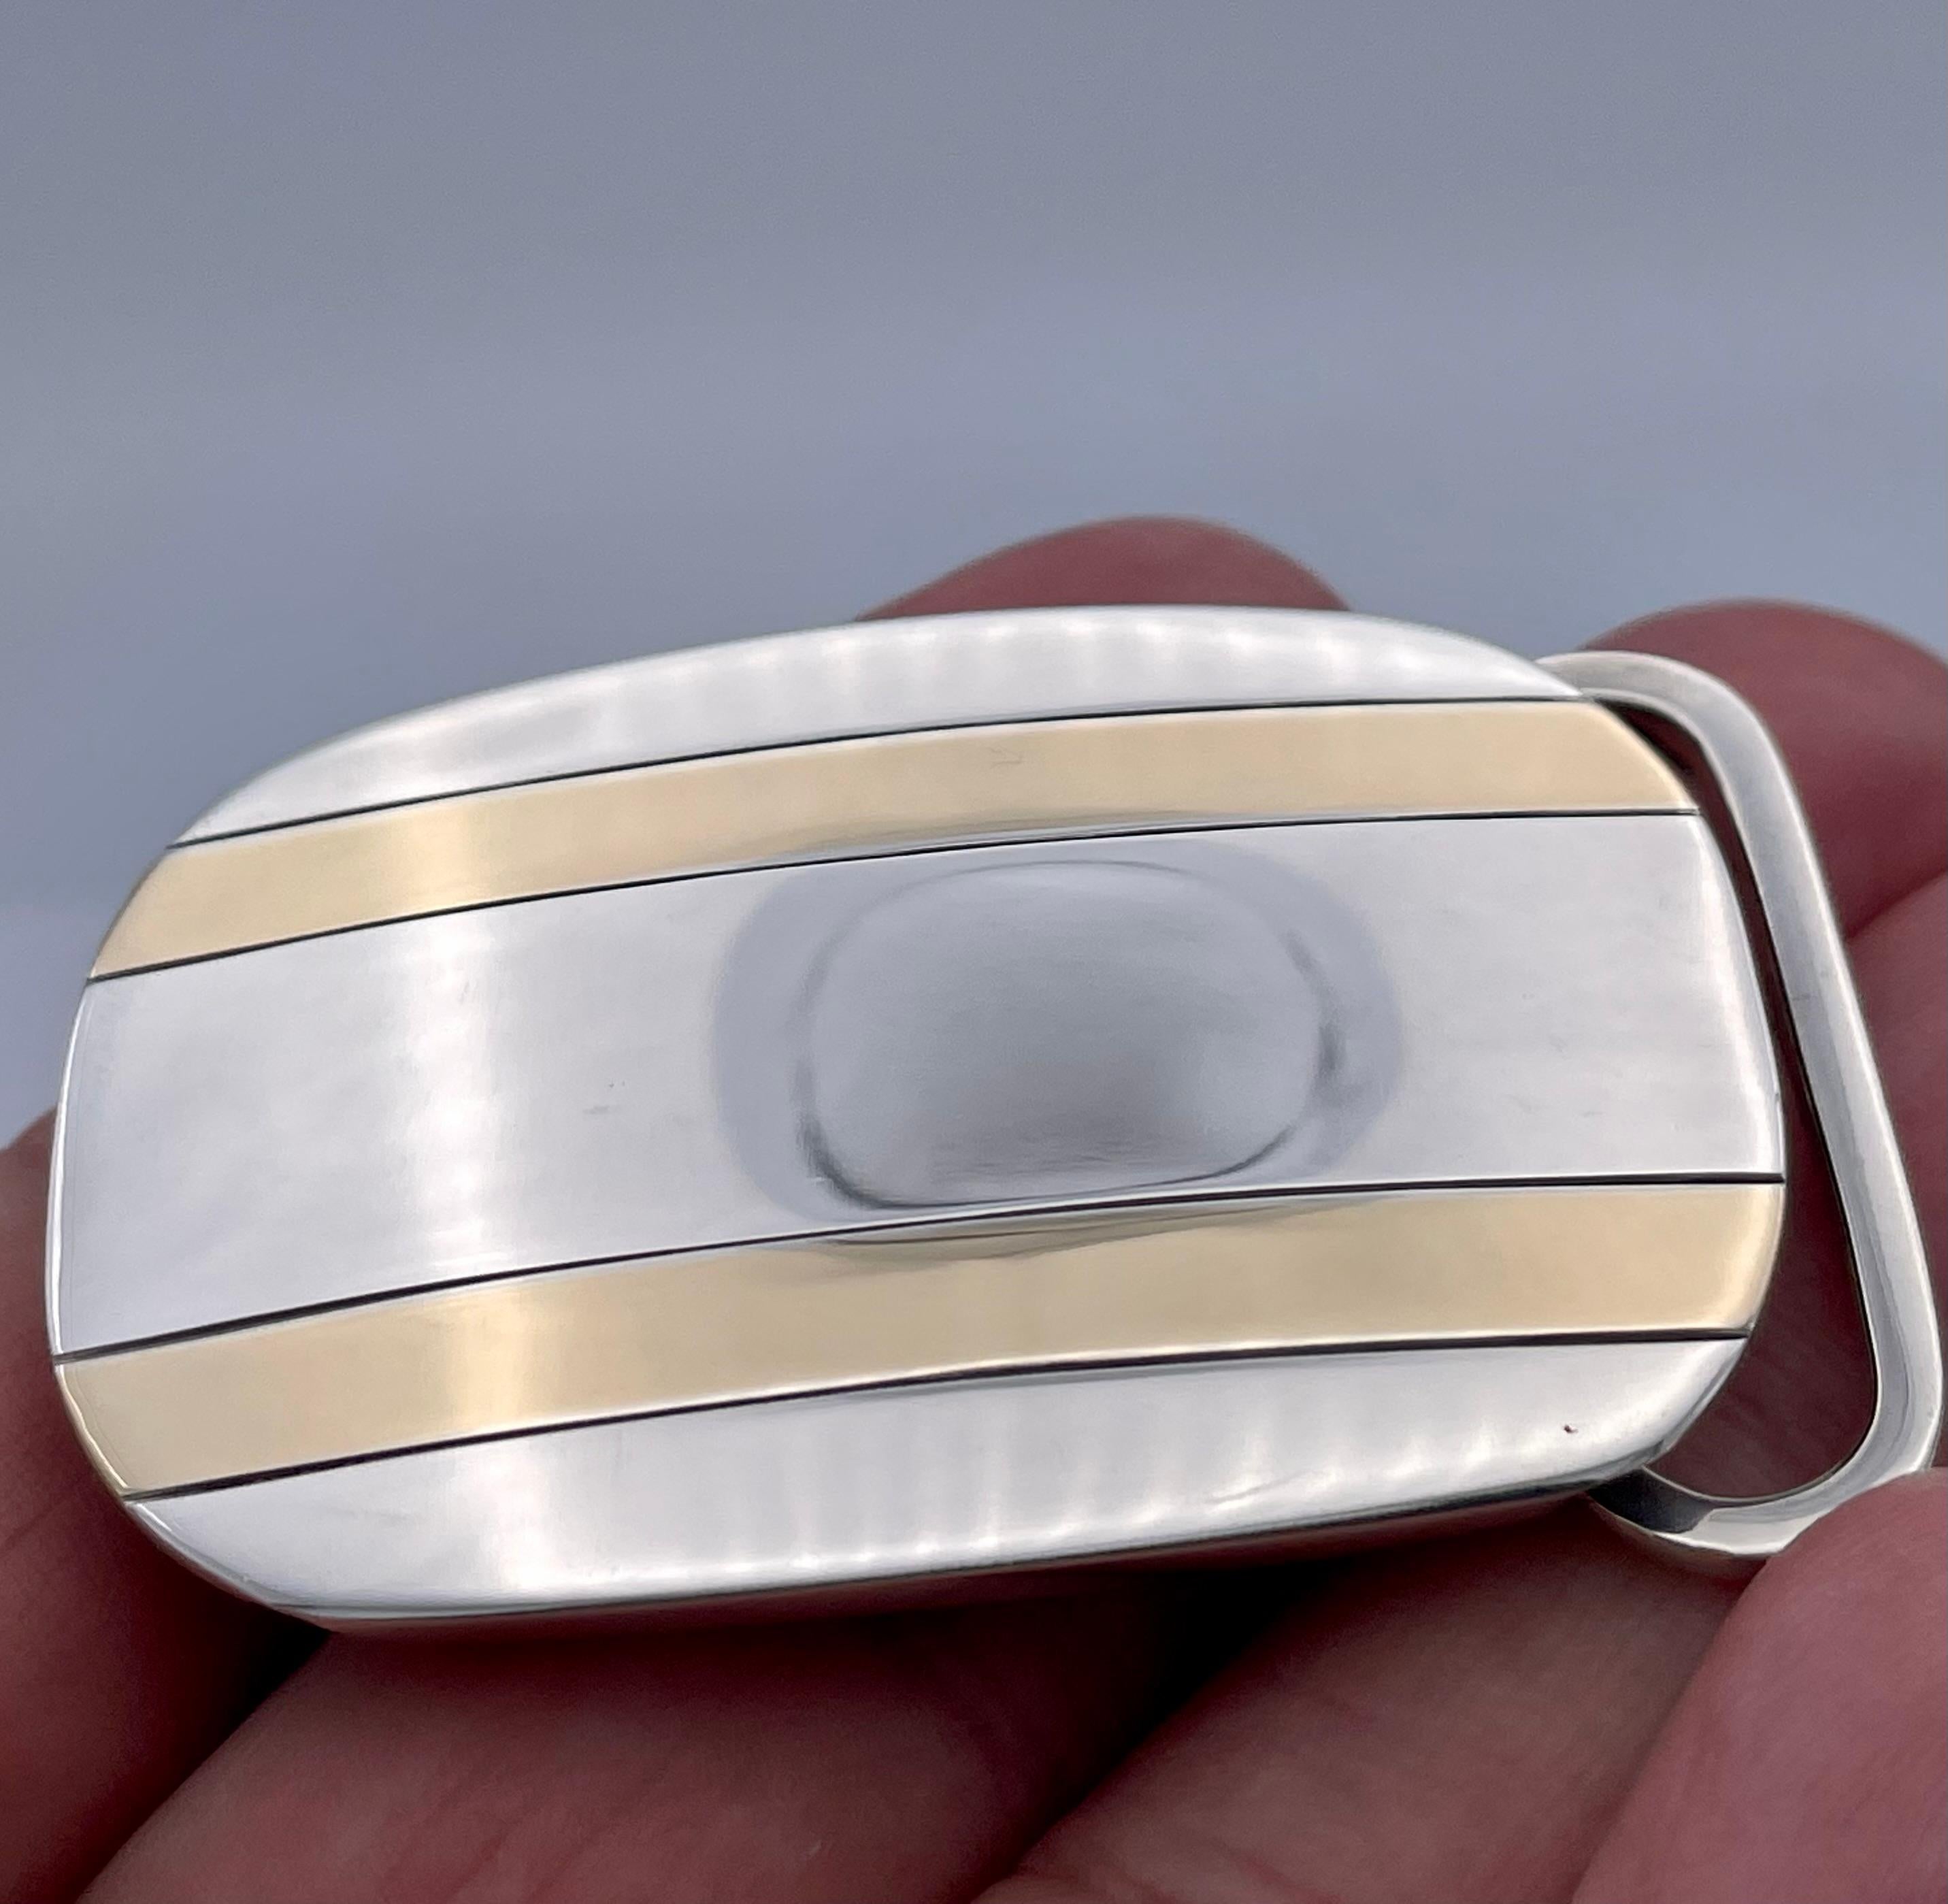 Handsome belt buckle.  Made and signed by TIFFANY & CO.  Sterling silver with two parallel 14K yellow gold inset lines.  2